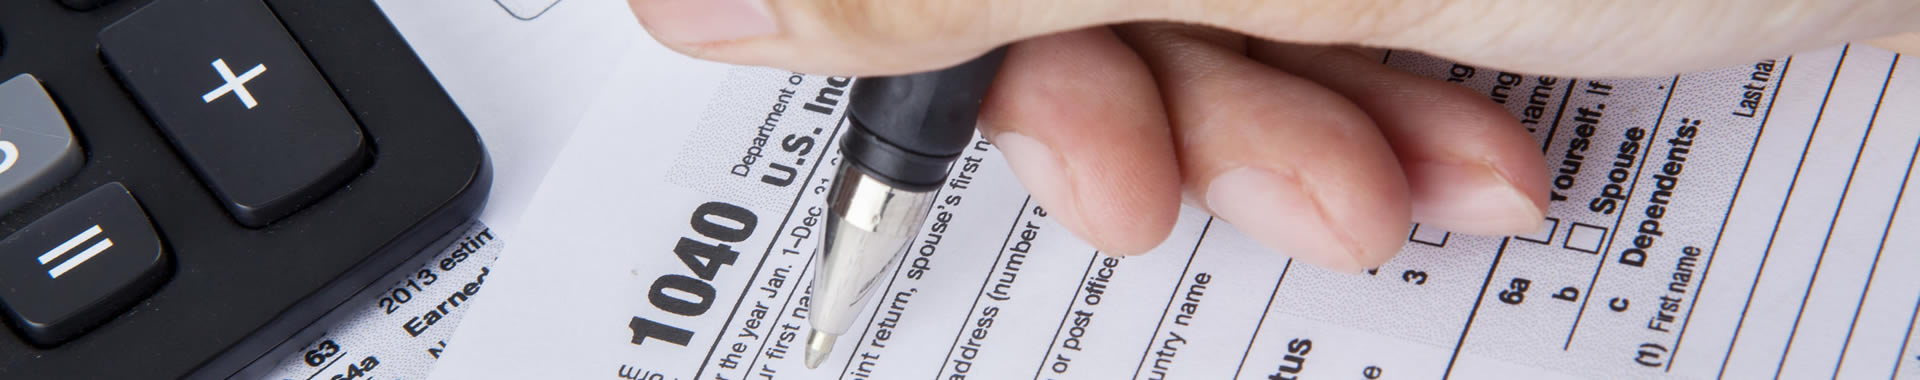 An image of a tax form depicts the concept of tax preparation.